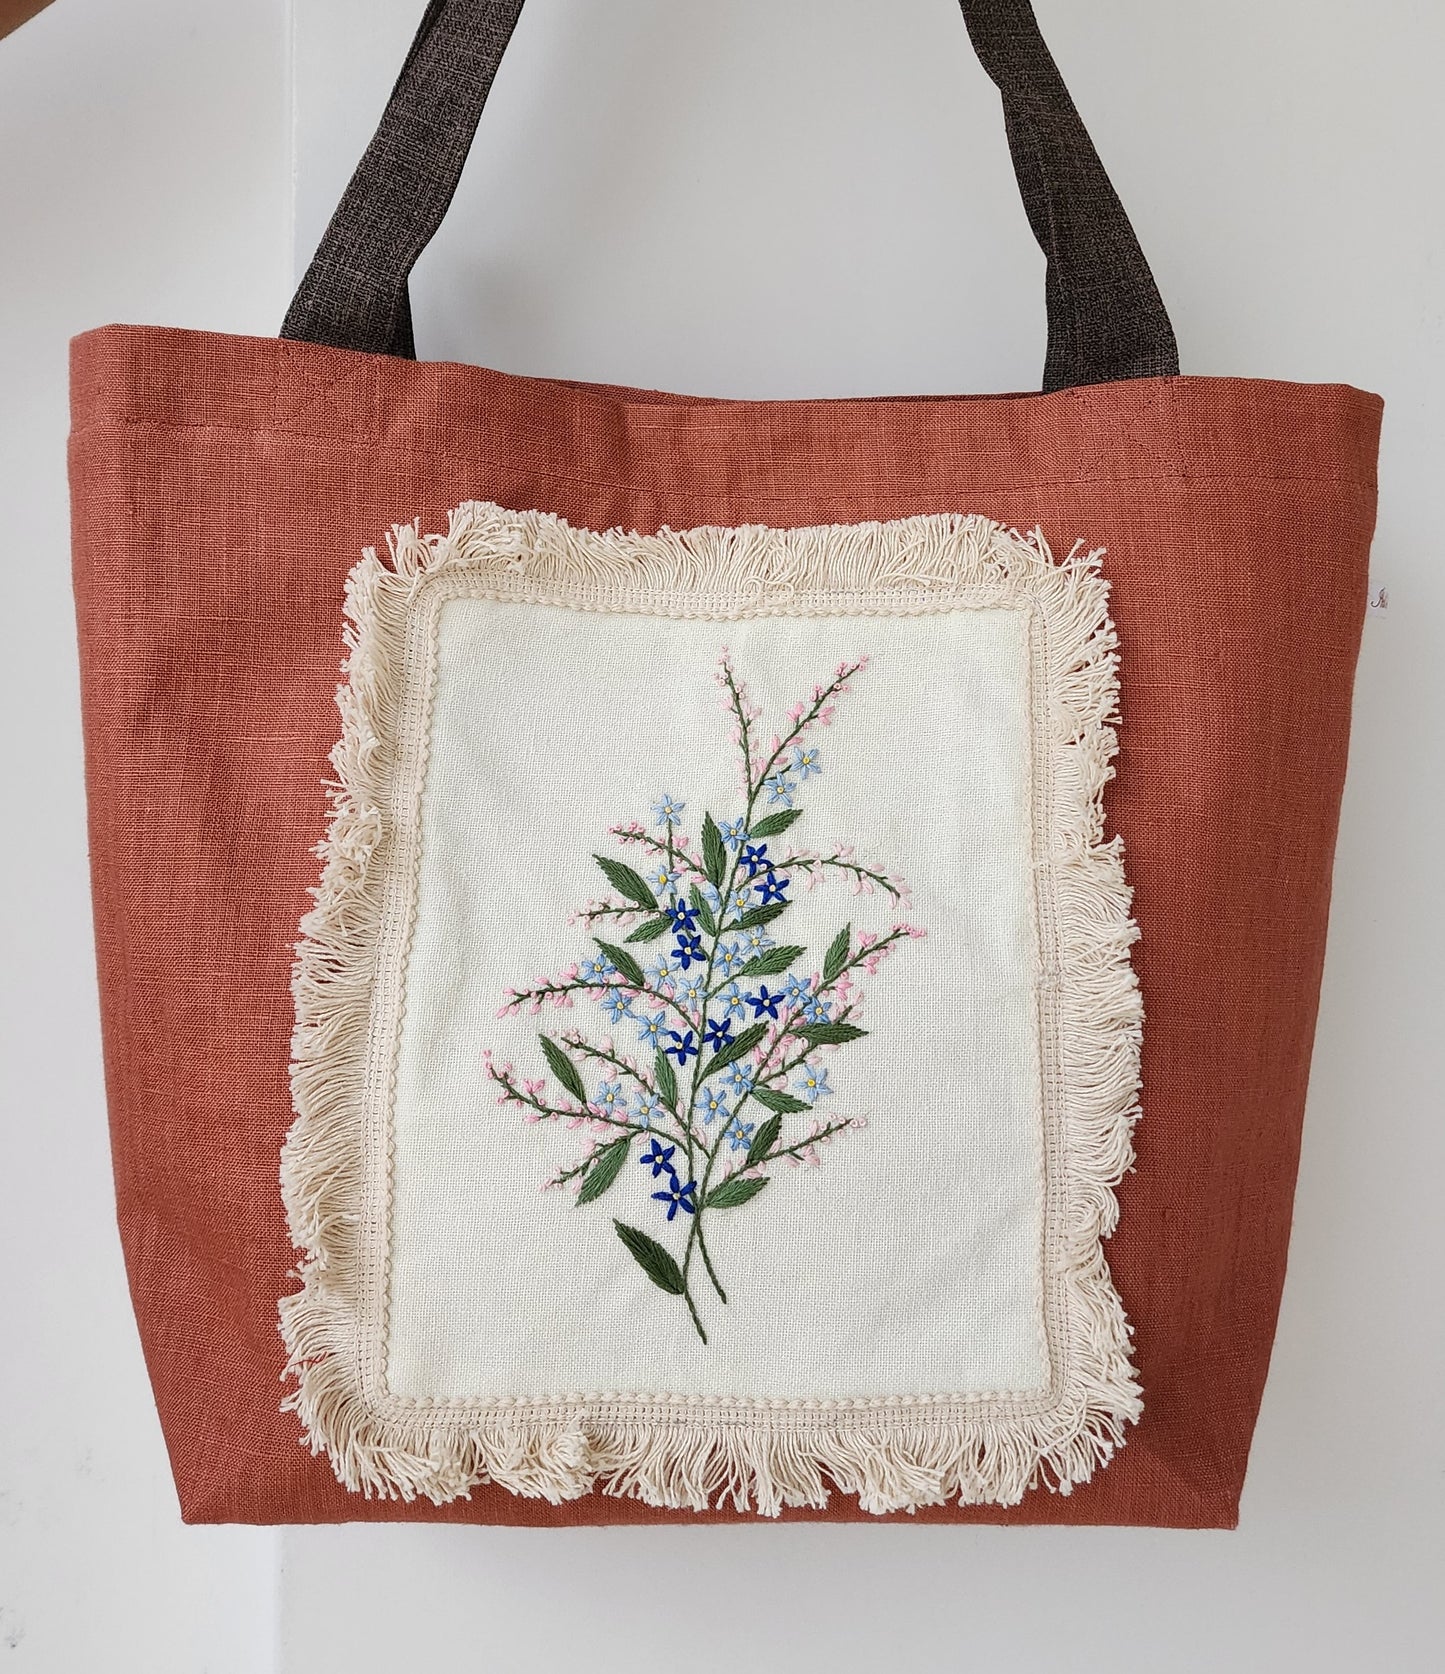 Ikali - Forget Me Not - Hand-embroidered Tote